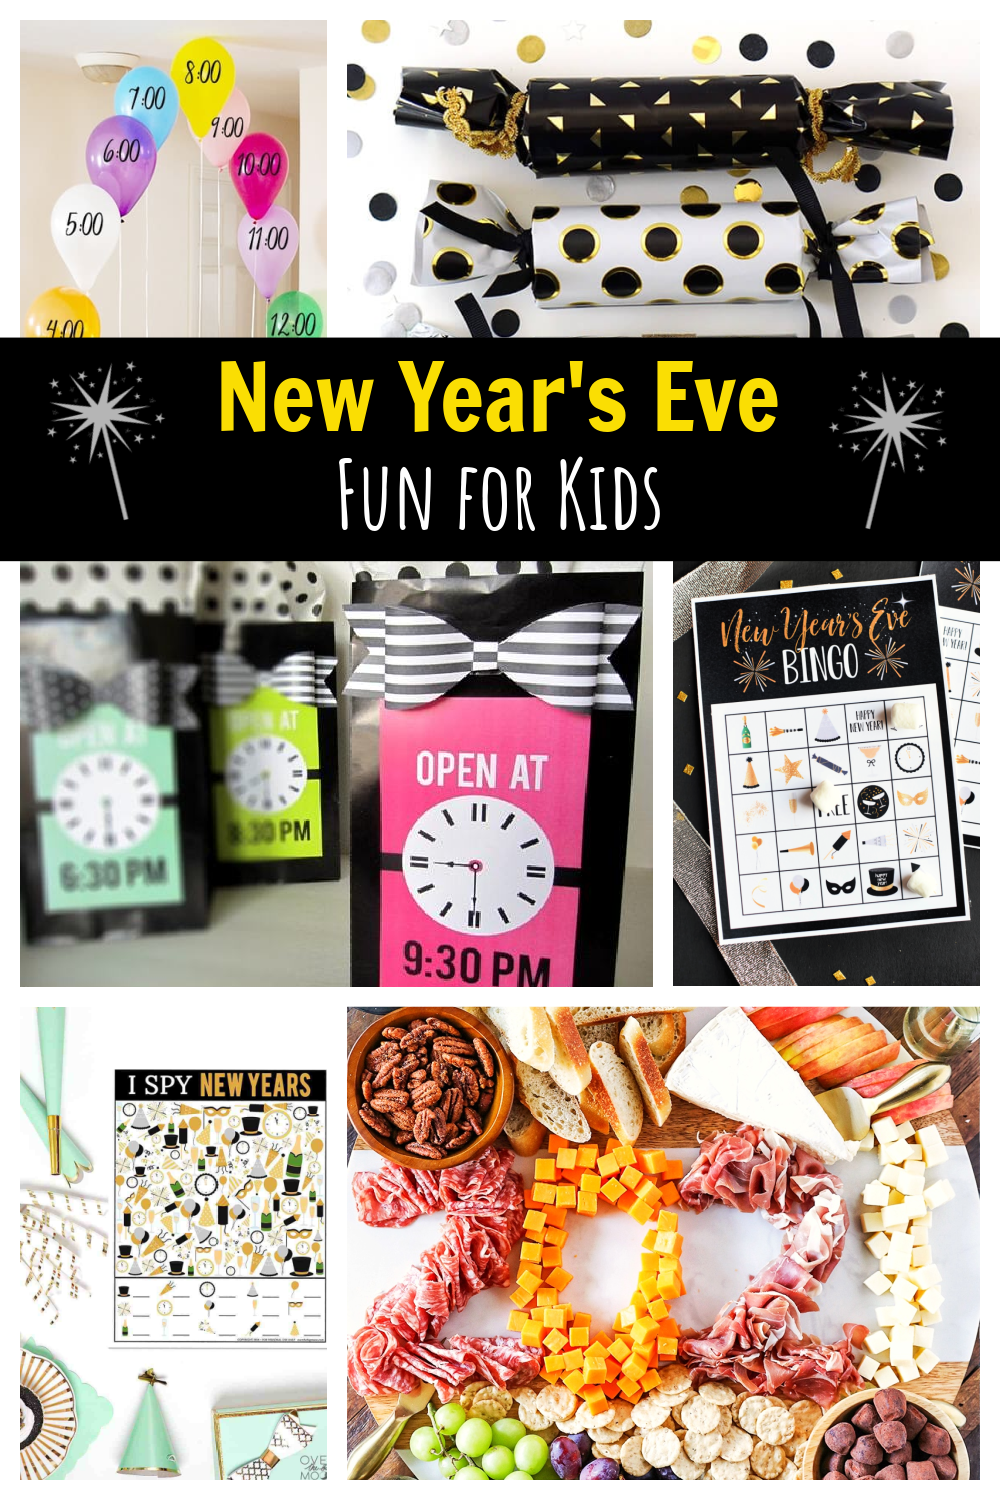 20 Fun Ideas for New Year's Eve with Kids: Games, activities, and printables to make a fun New Year's Eve party for the whole family